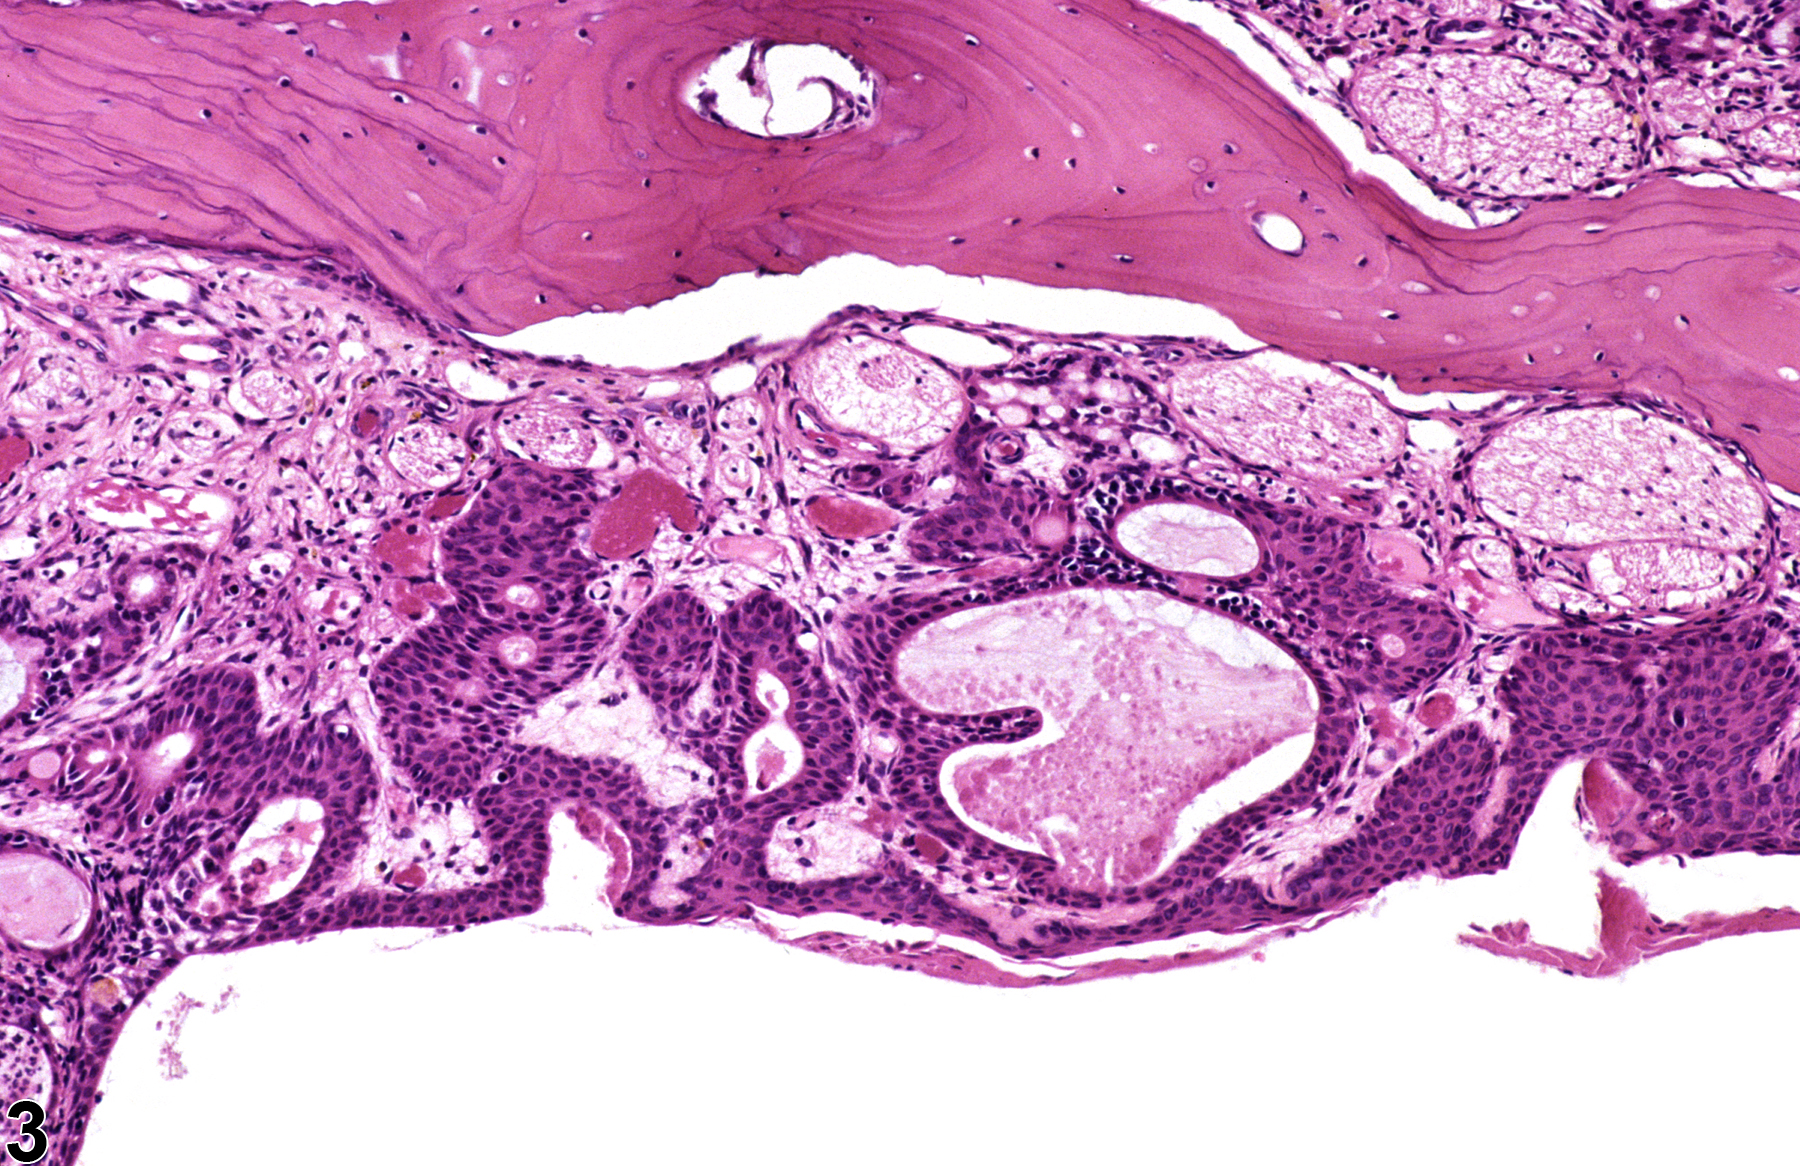 Image of metaplasia, squamous in the nose, olfactory epithelium, glands from a male F344/N rat in a chronic study